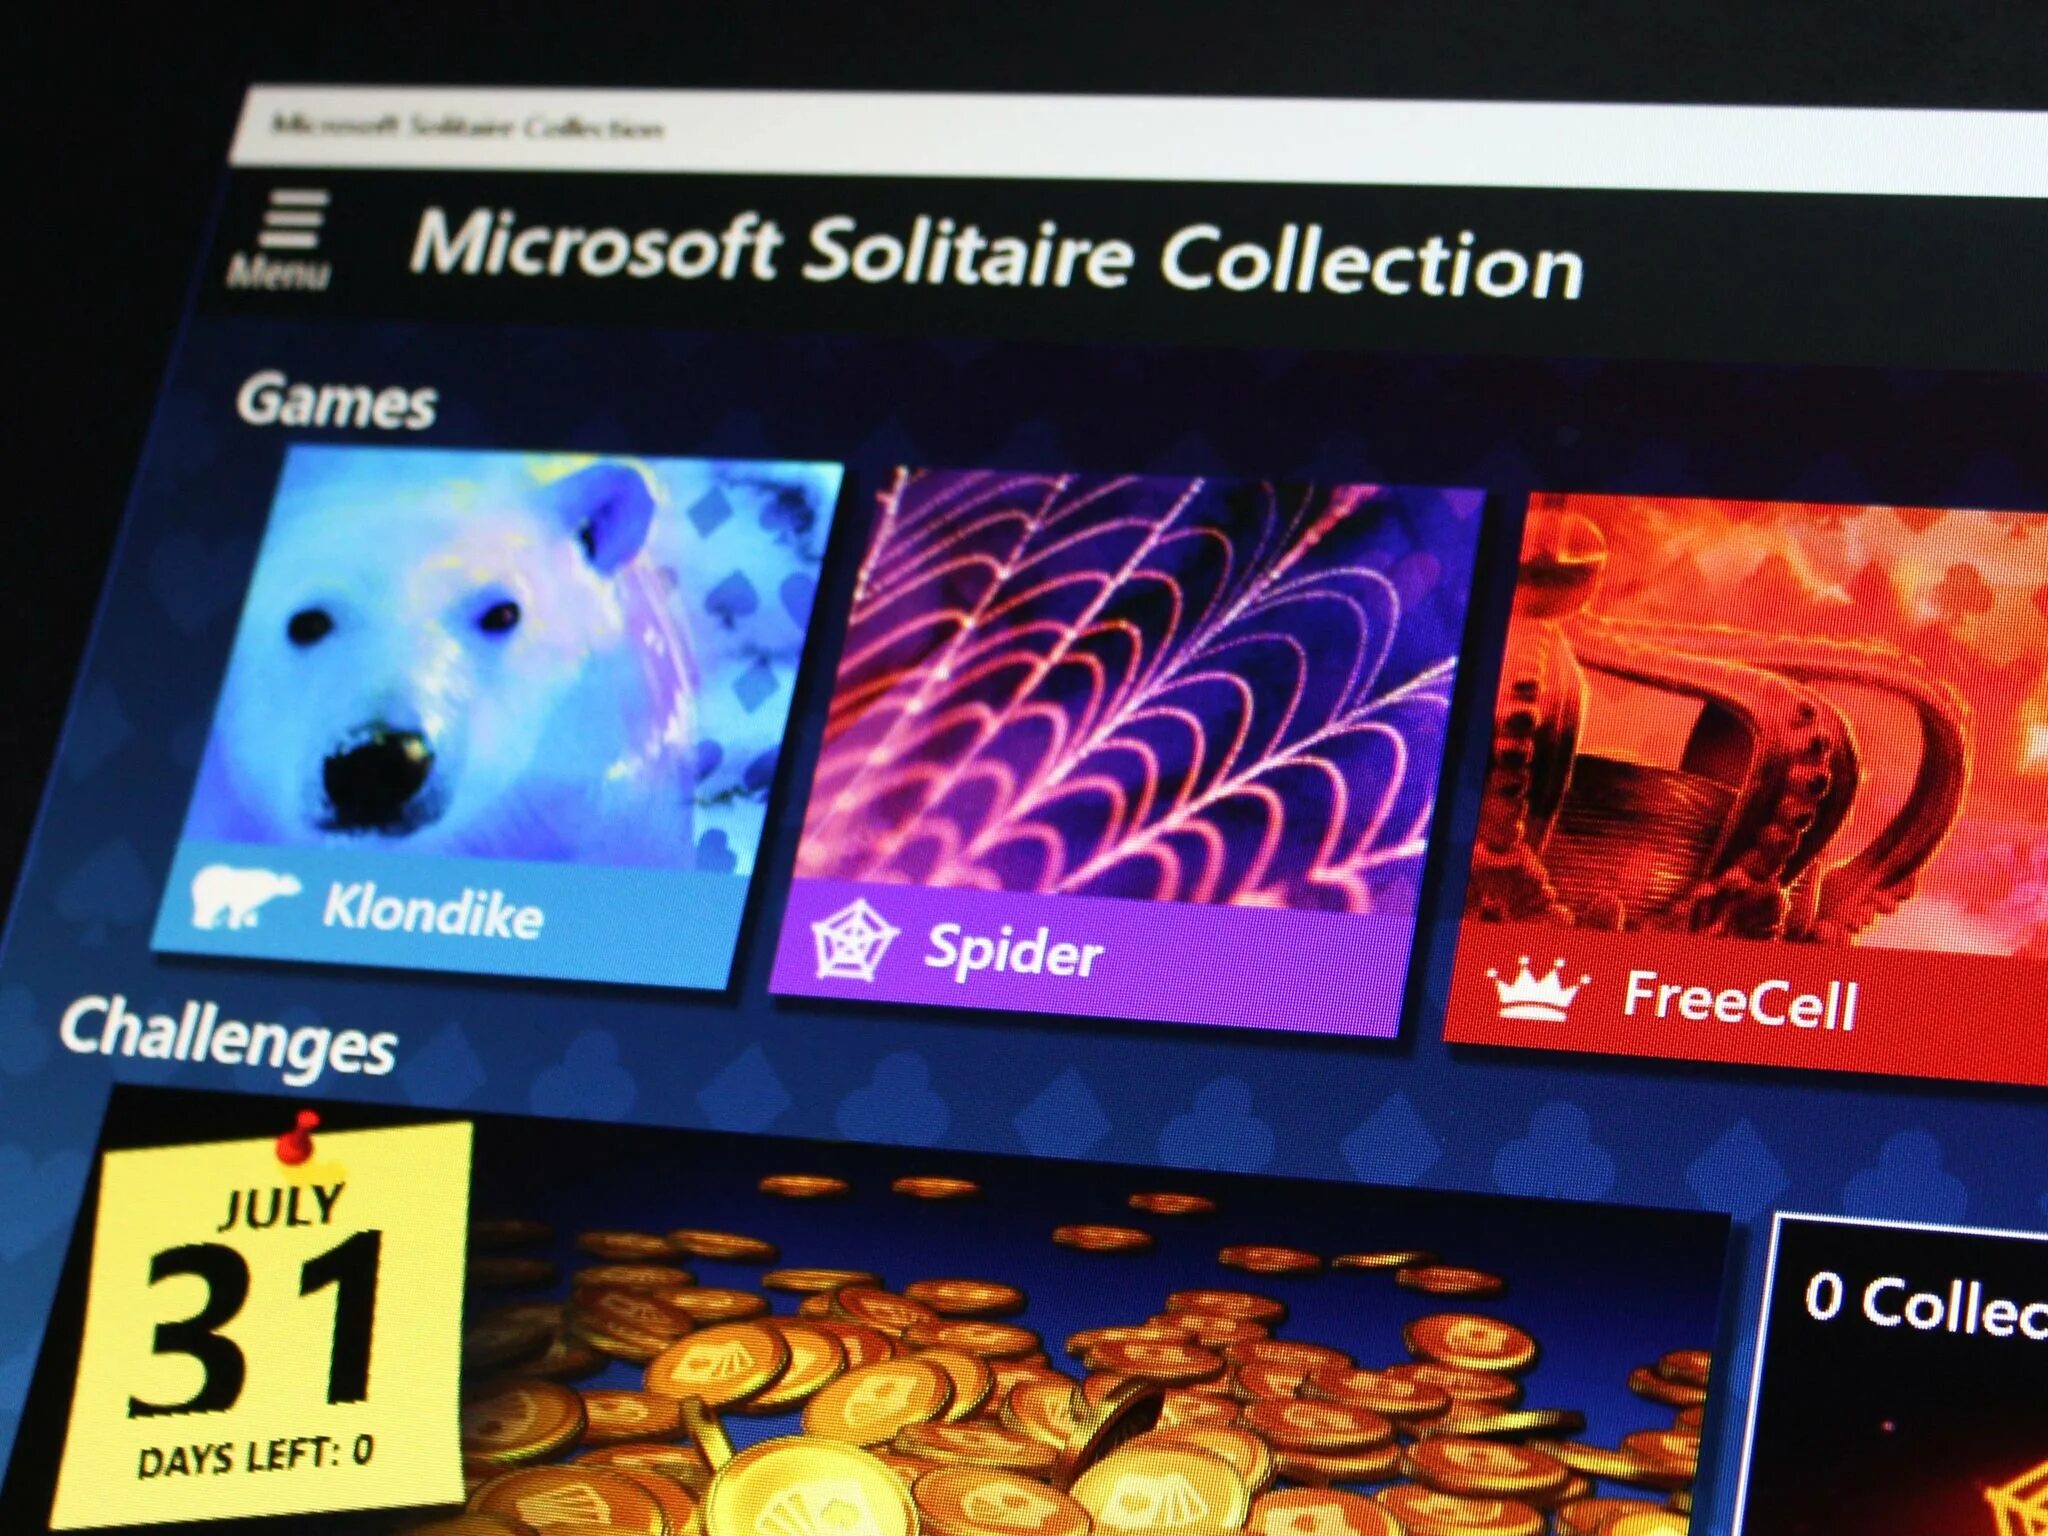 Windows 10 solitaire collection. Microsoft.Microsoft Solitaire collection. Игры Microsoft Solitaire collection. Microsoft Солитер коллекция. Солитер коллекшн.